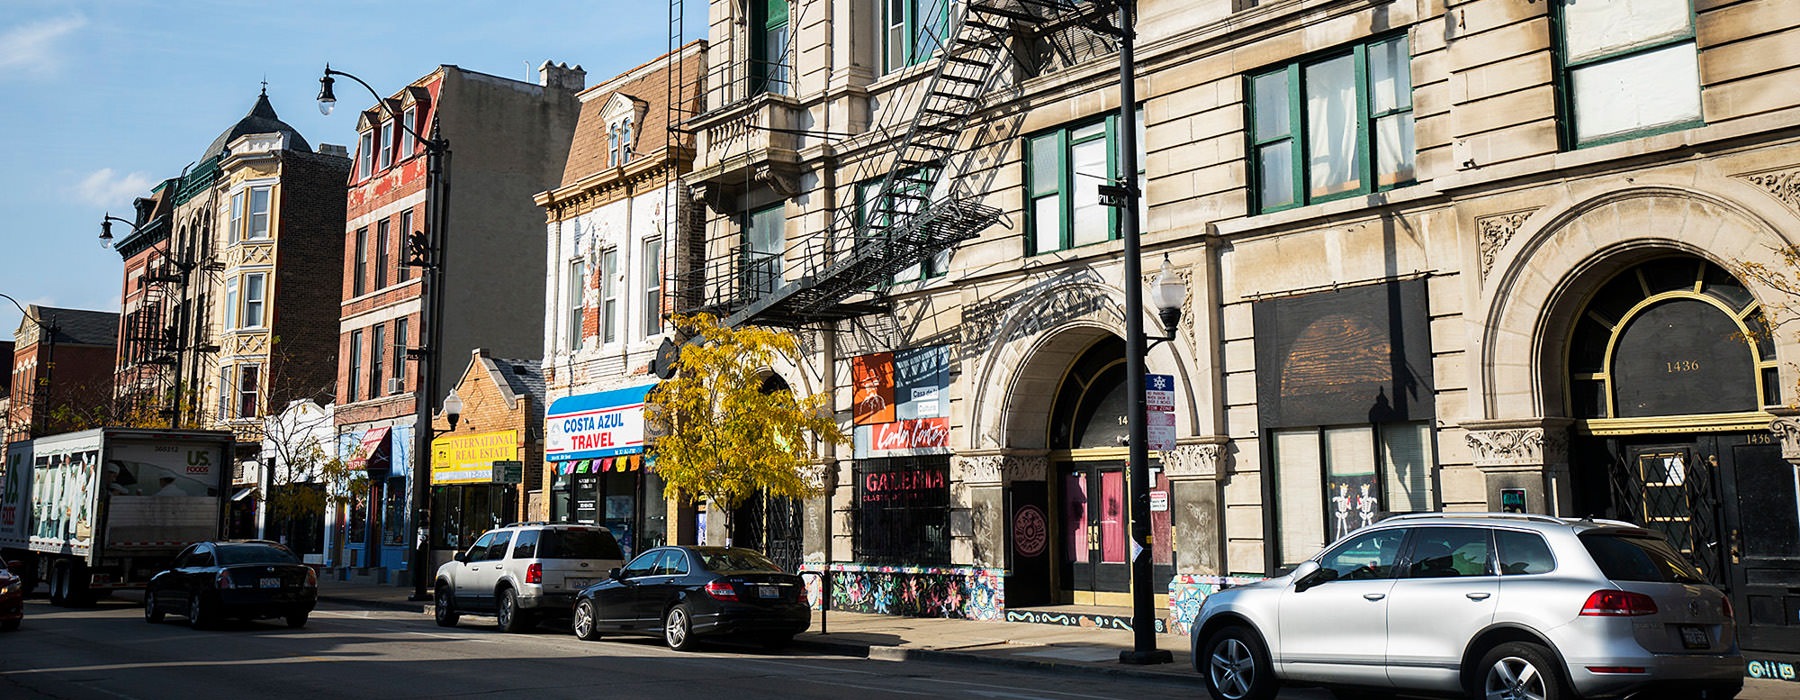 Within walking distance of the best that Pilsen has to offer - The Otis offers culture and community right outside your door!